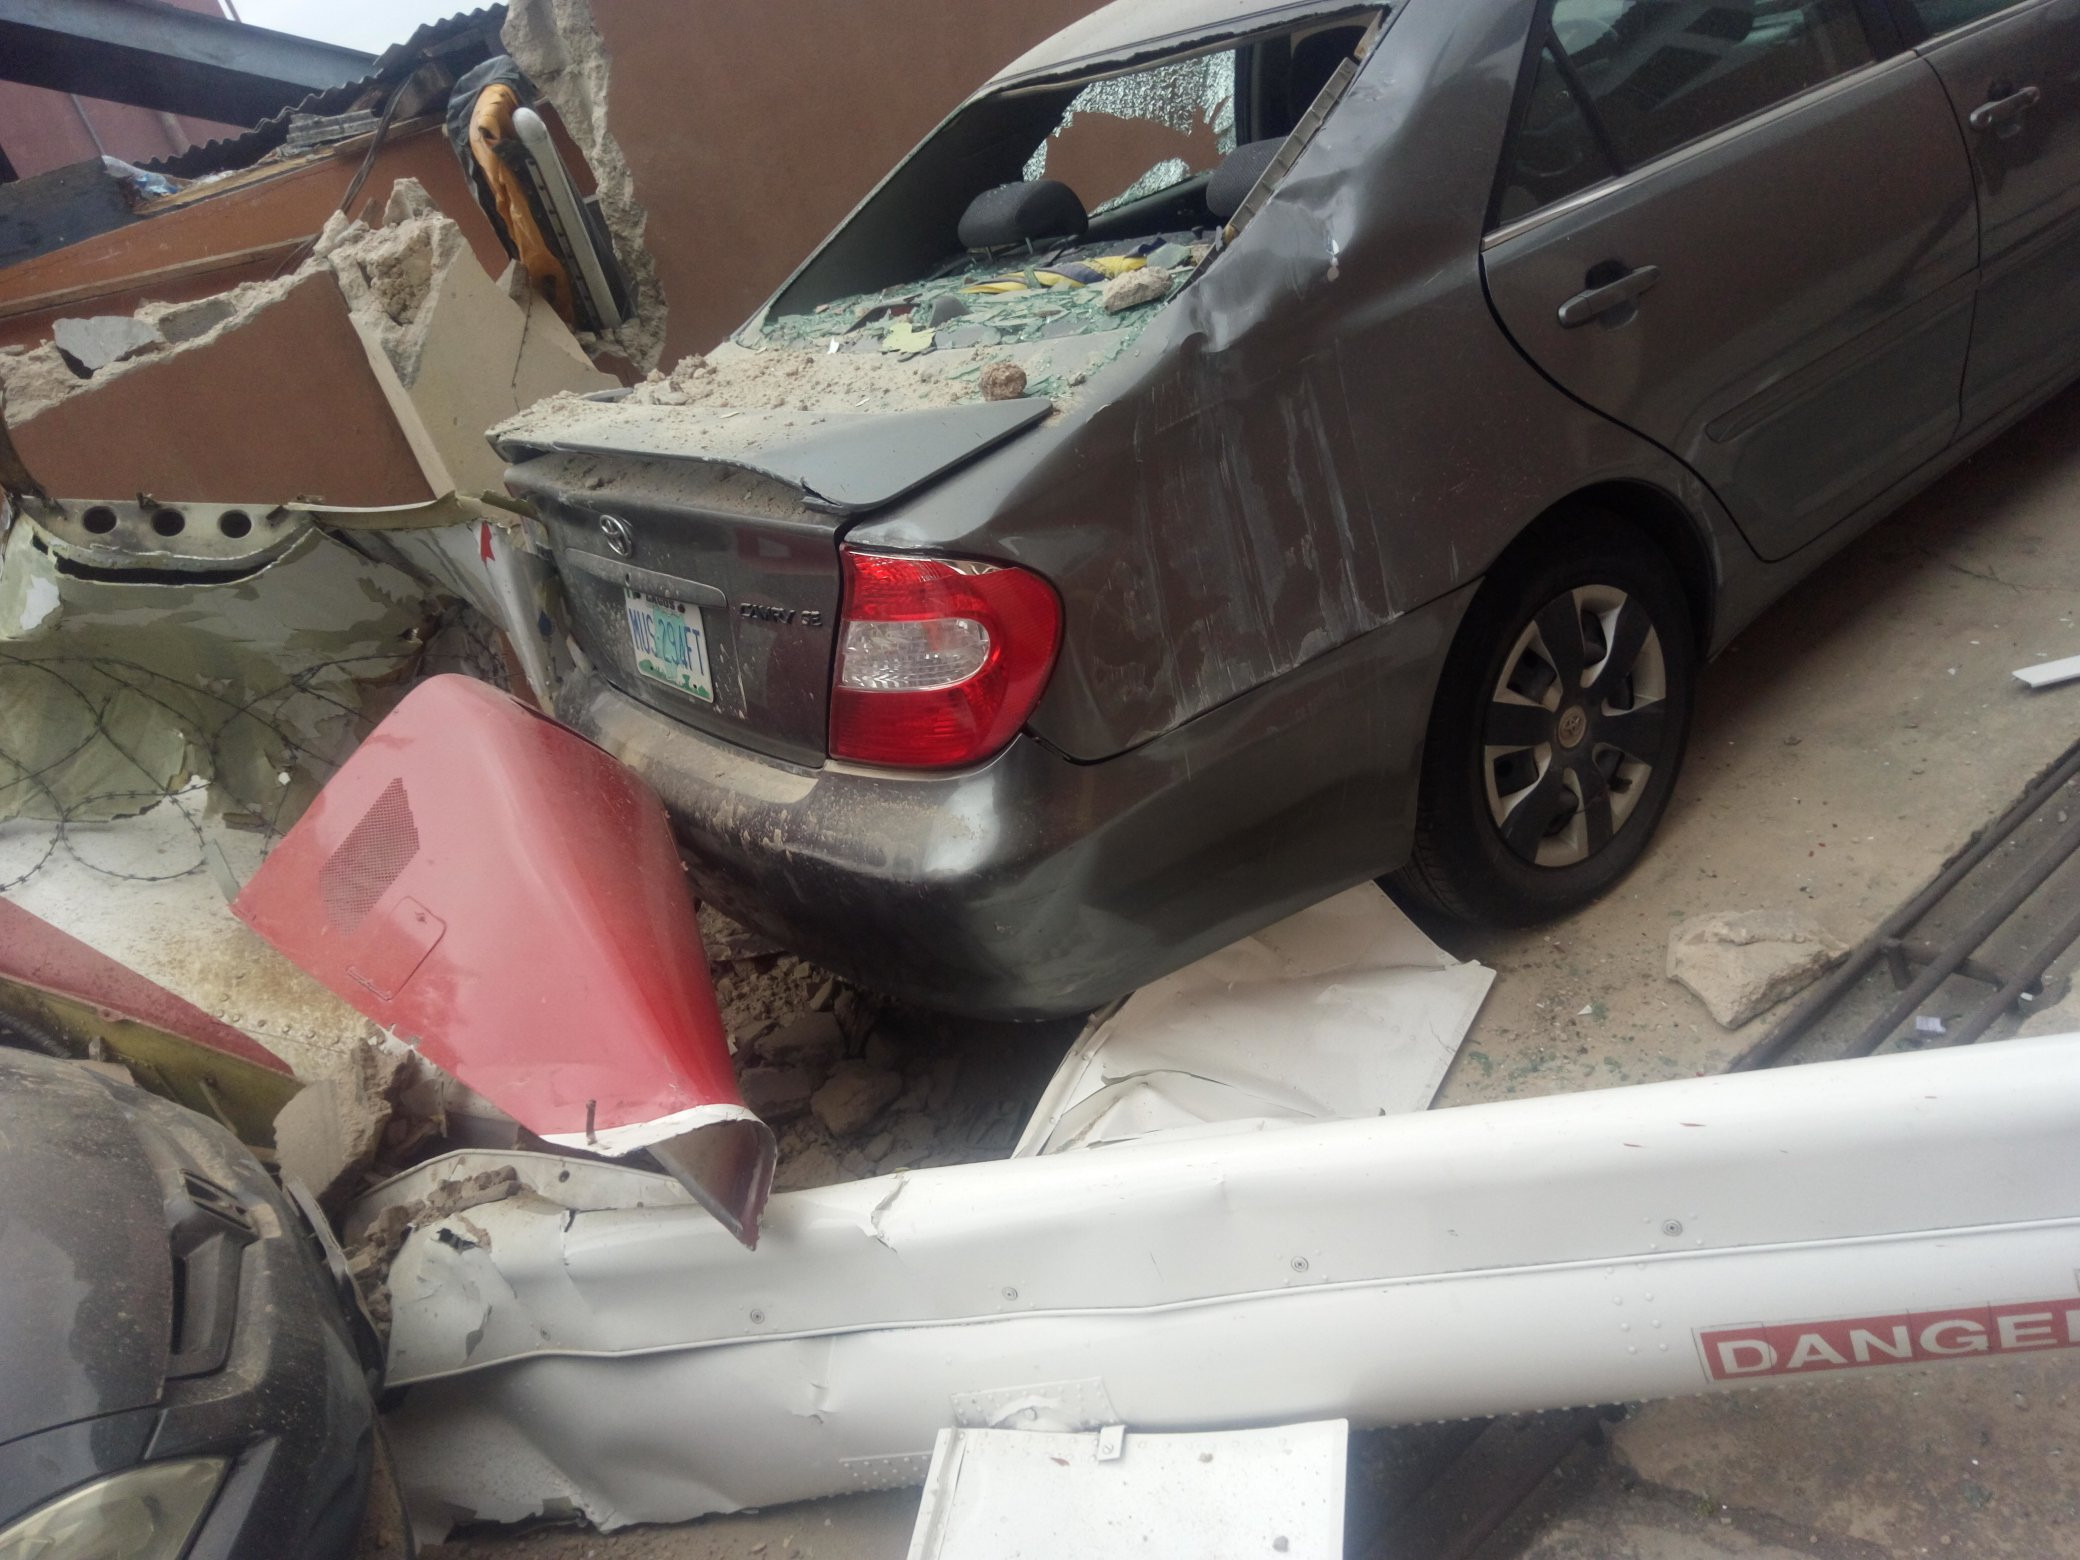 BREAKING NEWS: Helicopter Crashes Into Residential Building In Lagos